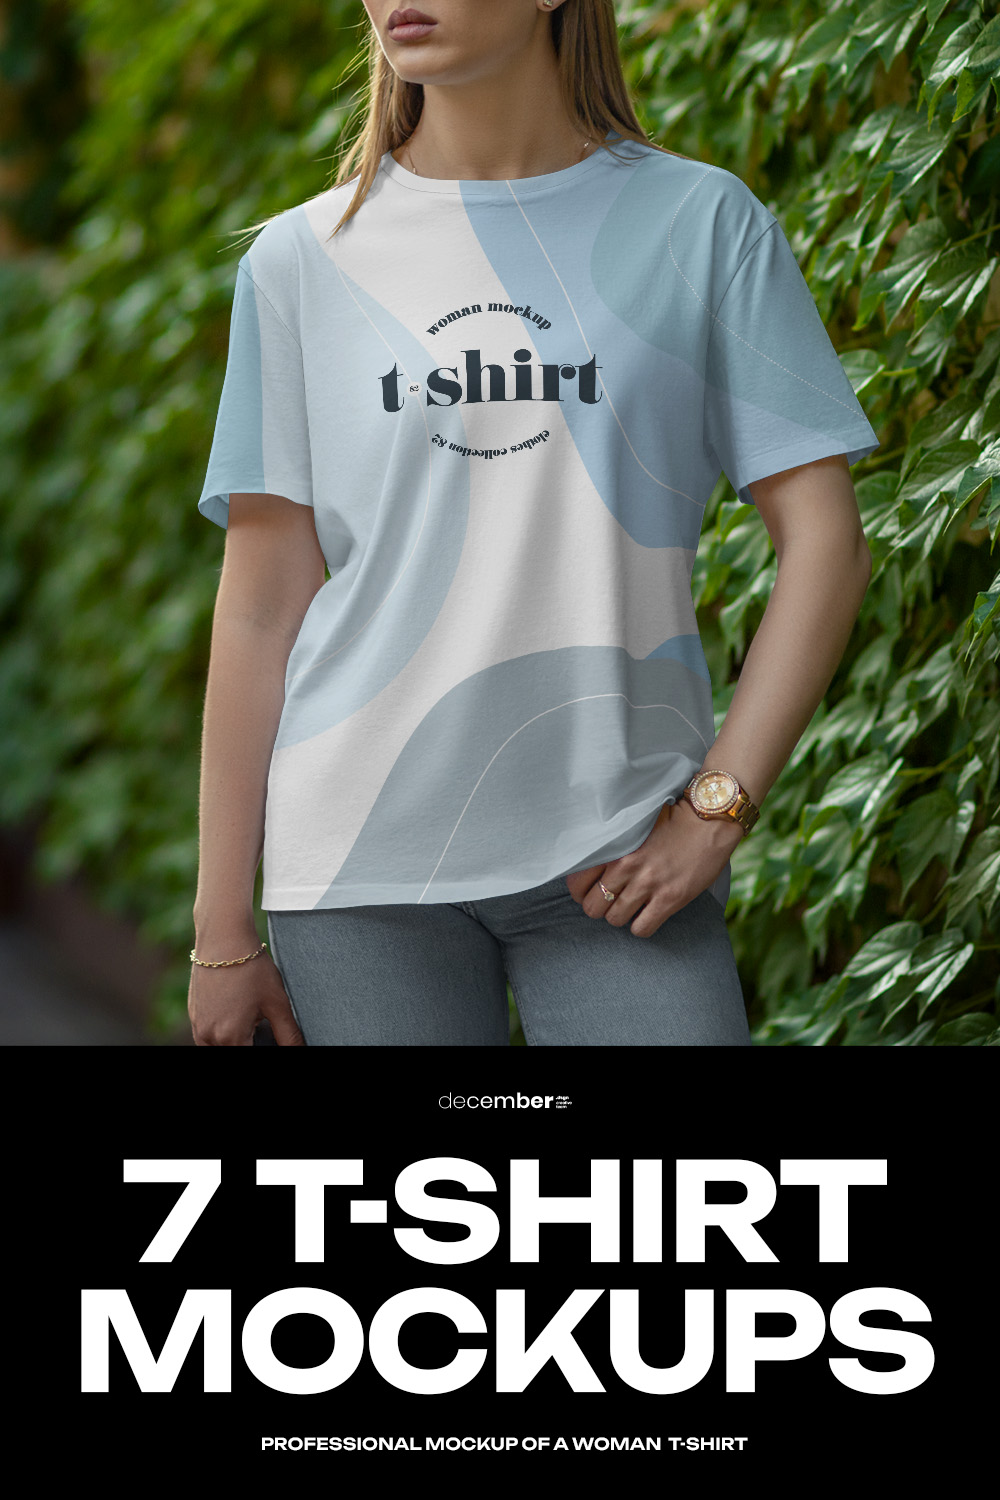 7 Mockups T-Shirt on a Girl Walking in the Green Street pinterest preview image.